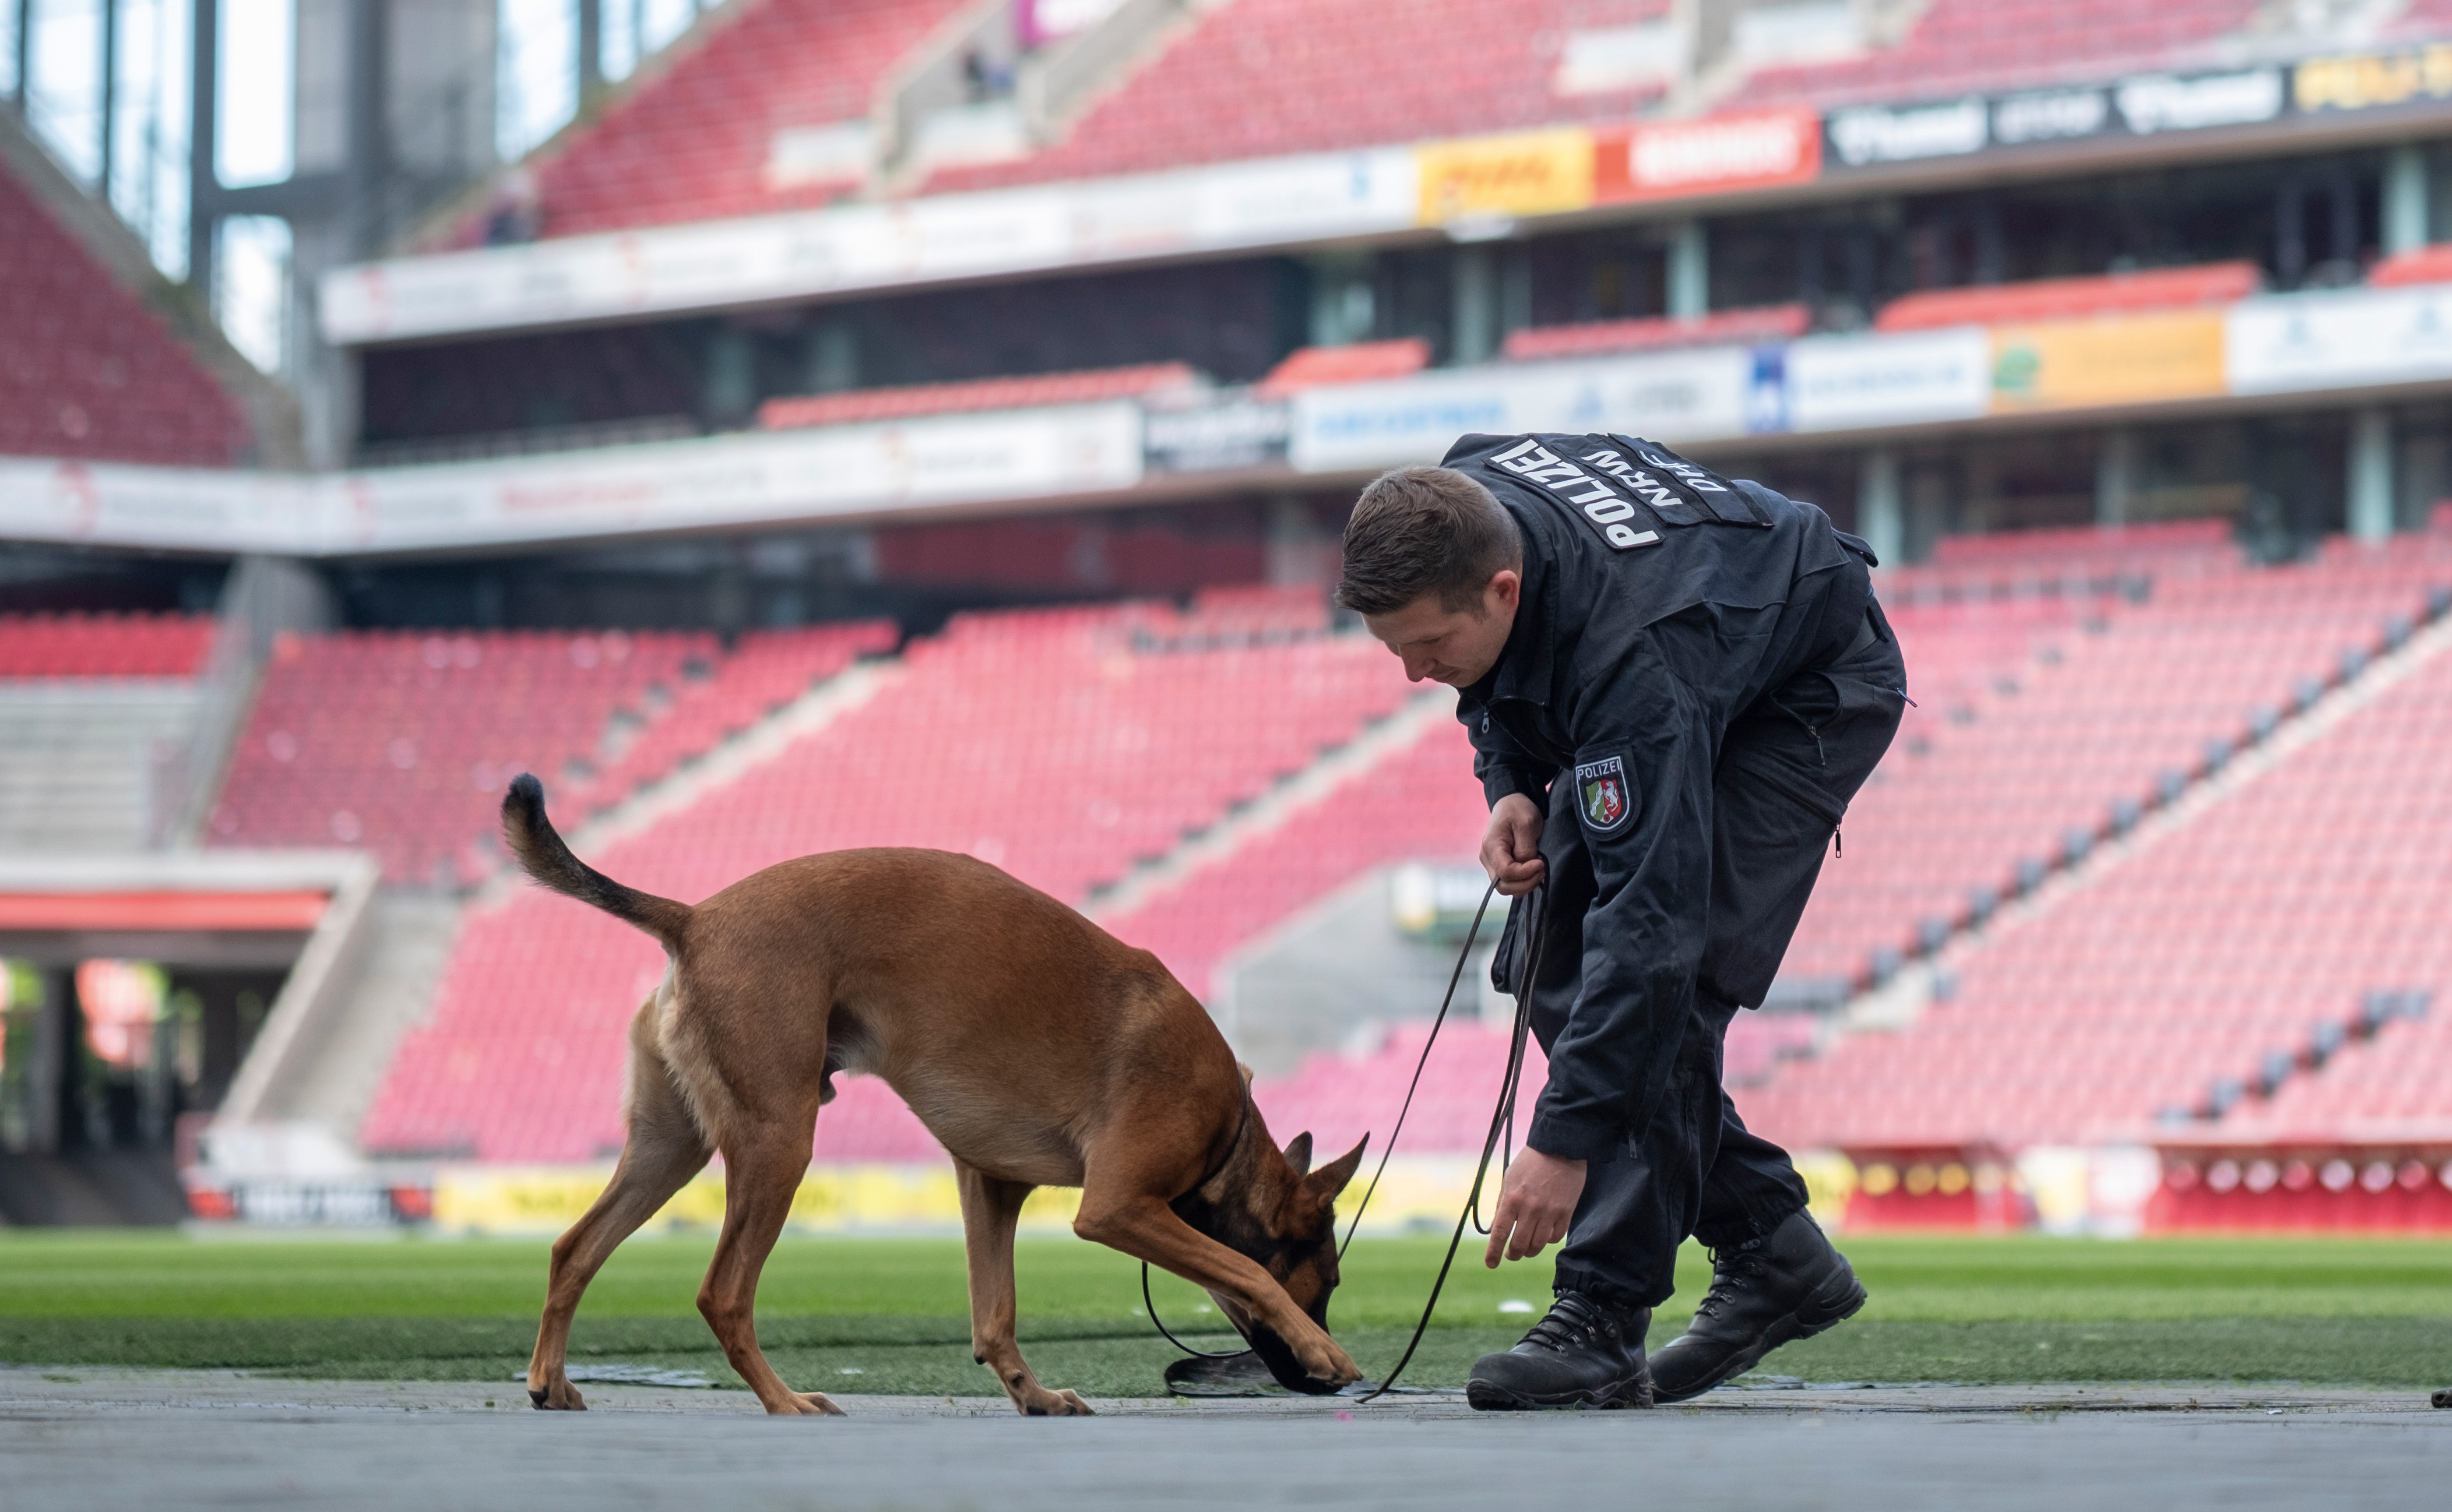 Police superintendent Pascal M. is doing an exercise with explosives detection dog Loki in the RheinEnergieStadion. They are on the soccer pitch. Loki sniffs out something on the ground.